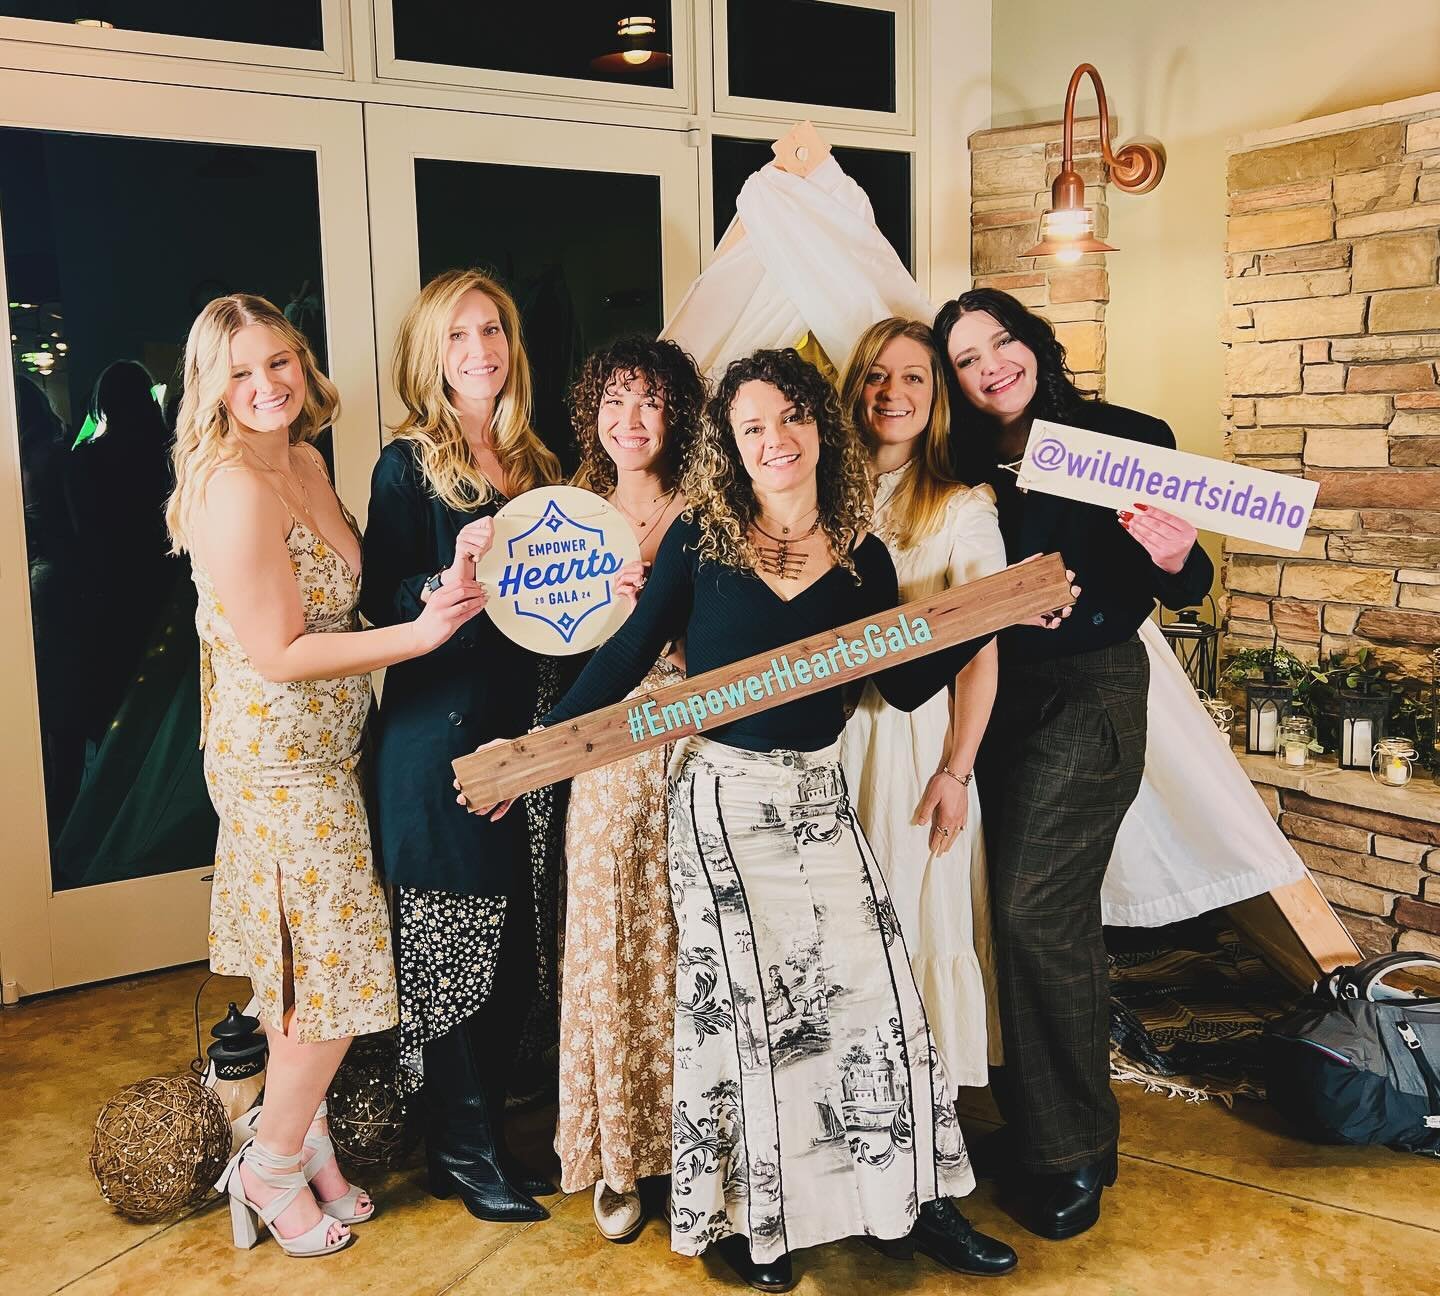 What an incredible night at the Empowered Hearts Gala! The Mavens truly rocked it, rallying support for Wild Hearts for Idaho, a local non-profit dedicated to empowering teen girls through adventurous Idaho experiences. At 21 North, we&rsquo;re all a